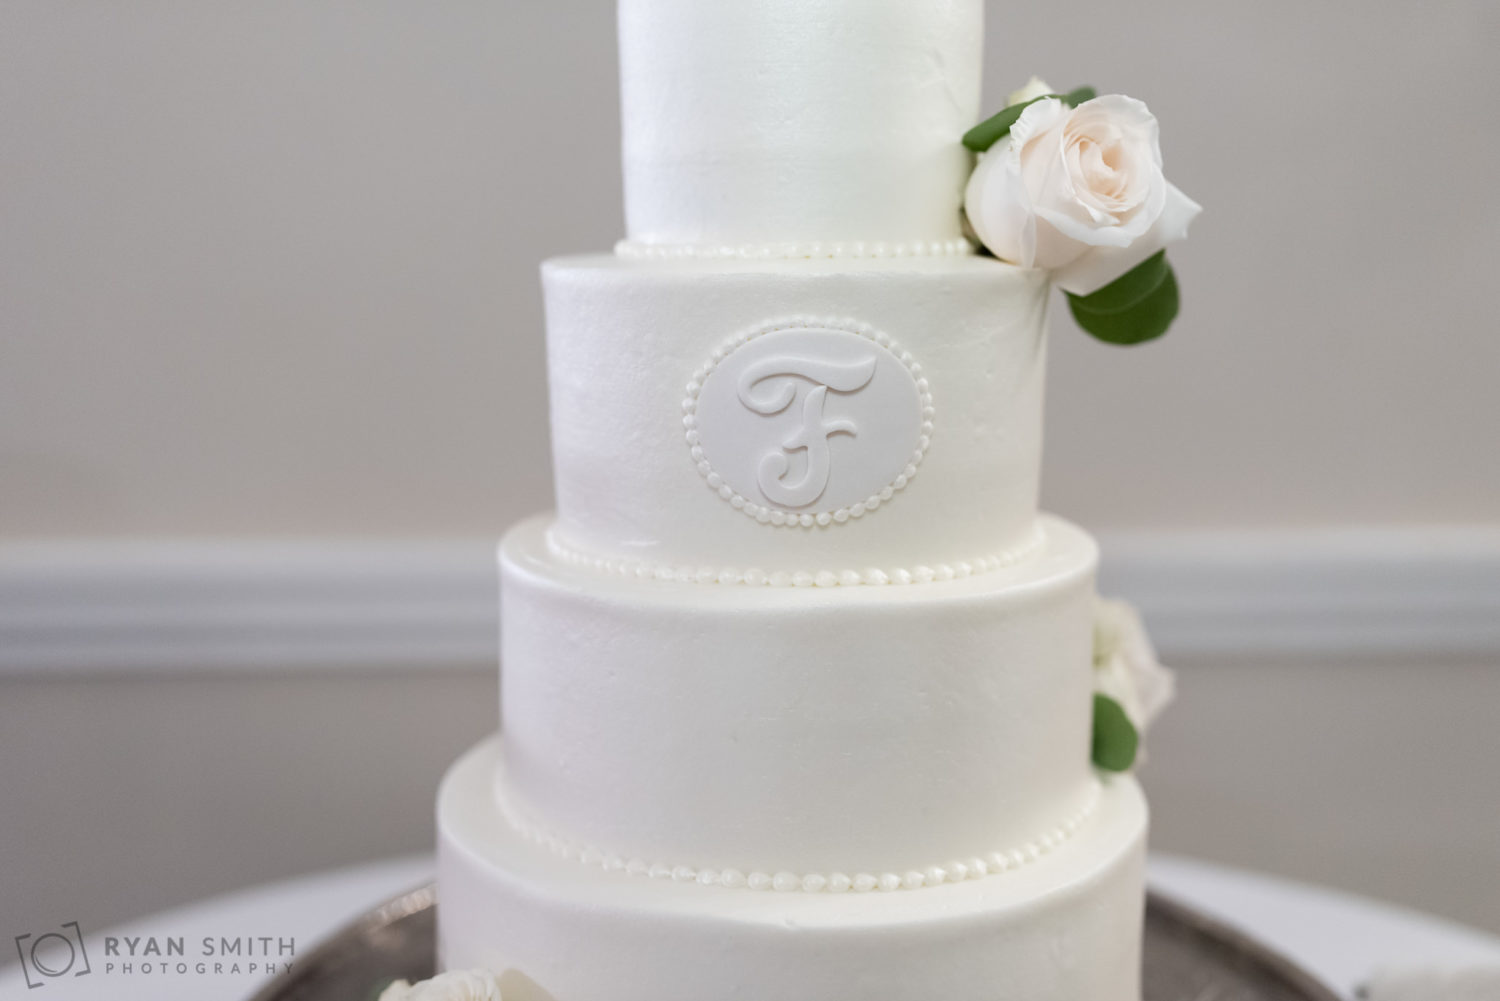 Detail pictures of the wedding cake - Kimbel's - Wachesaw Plantation